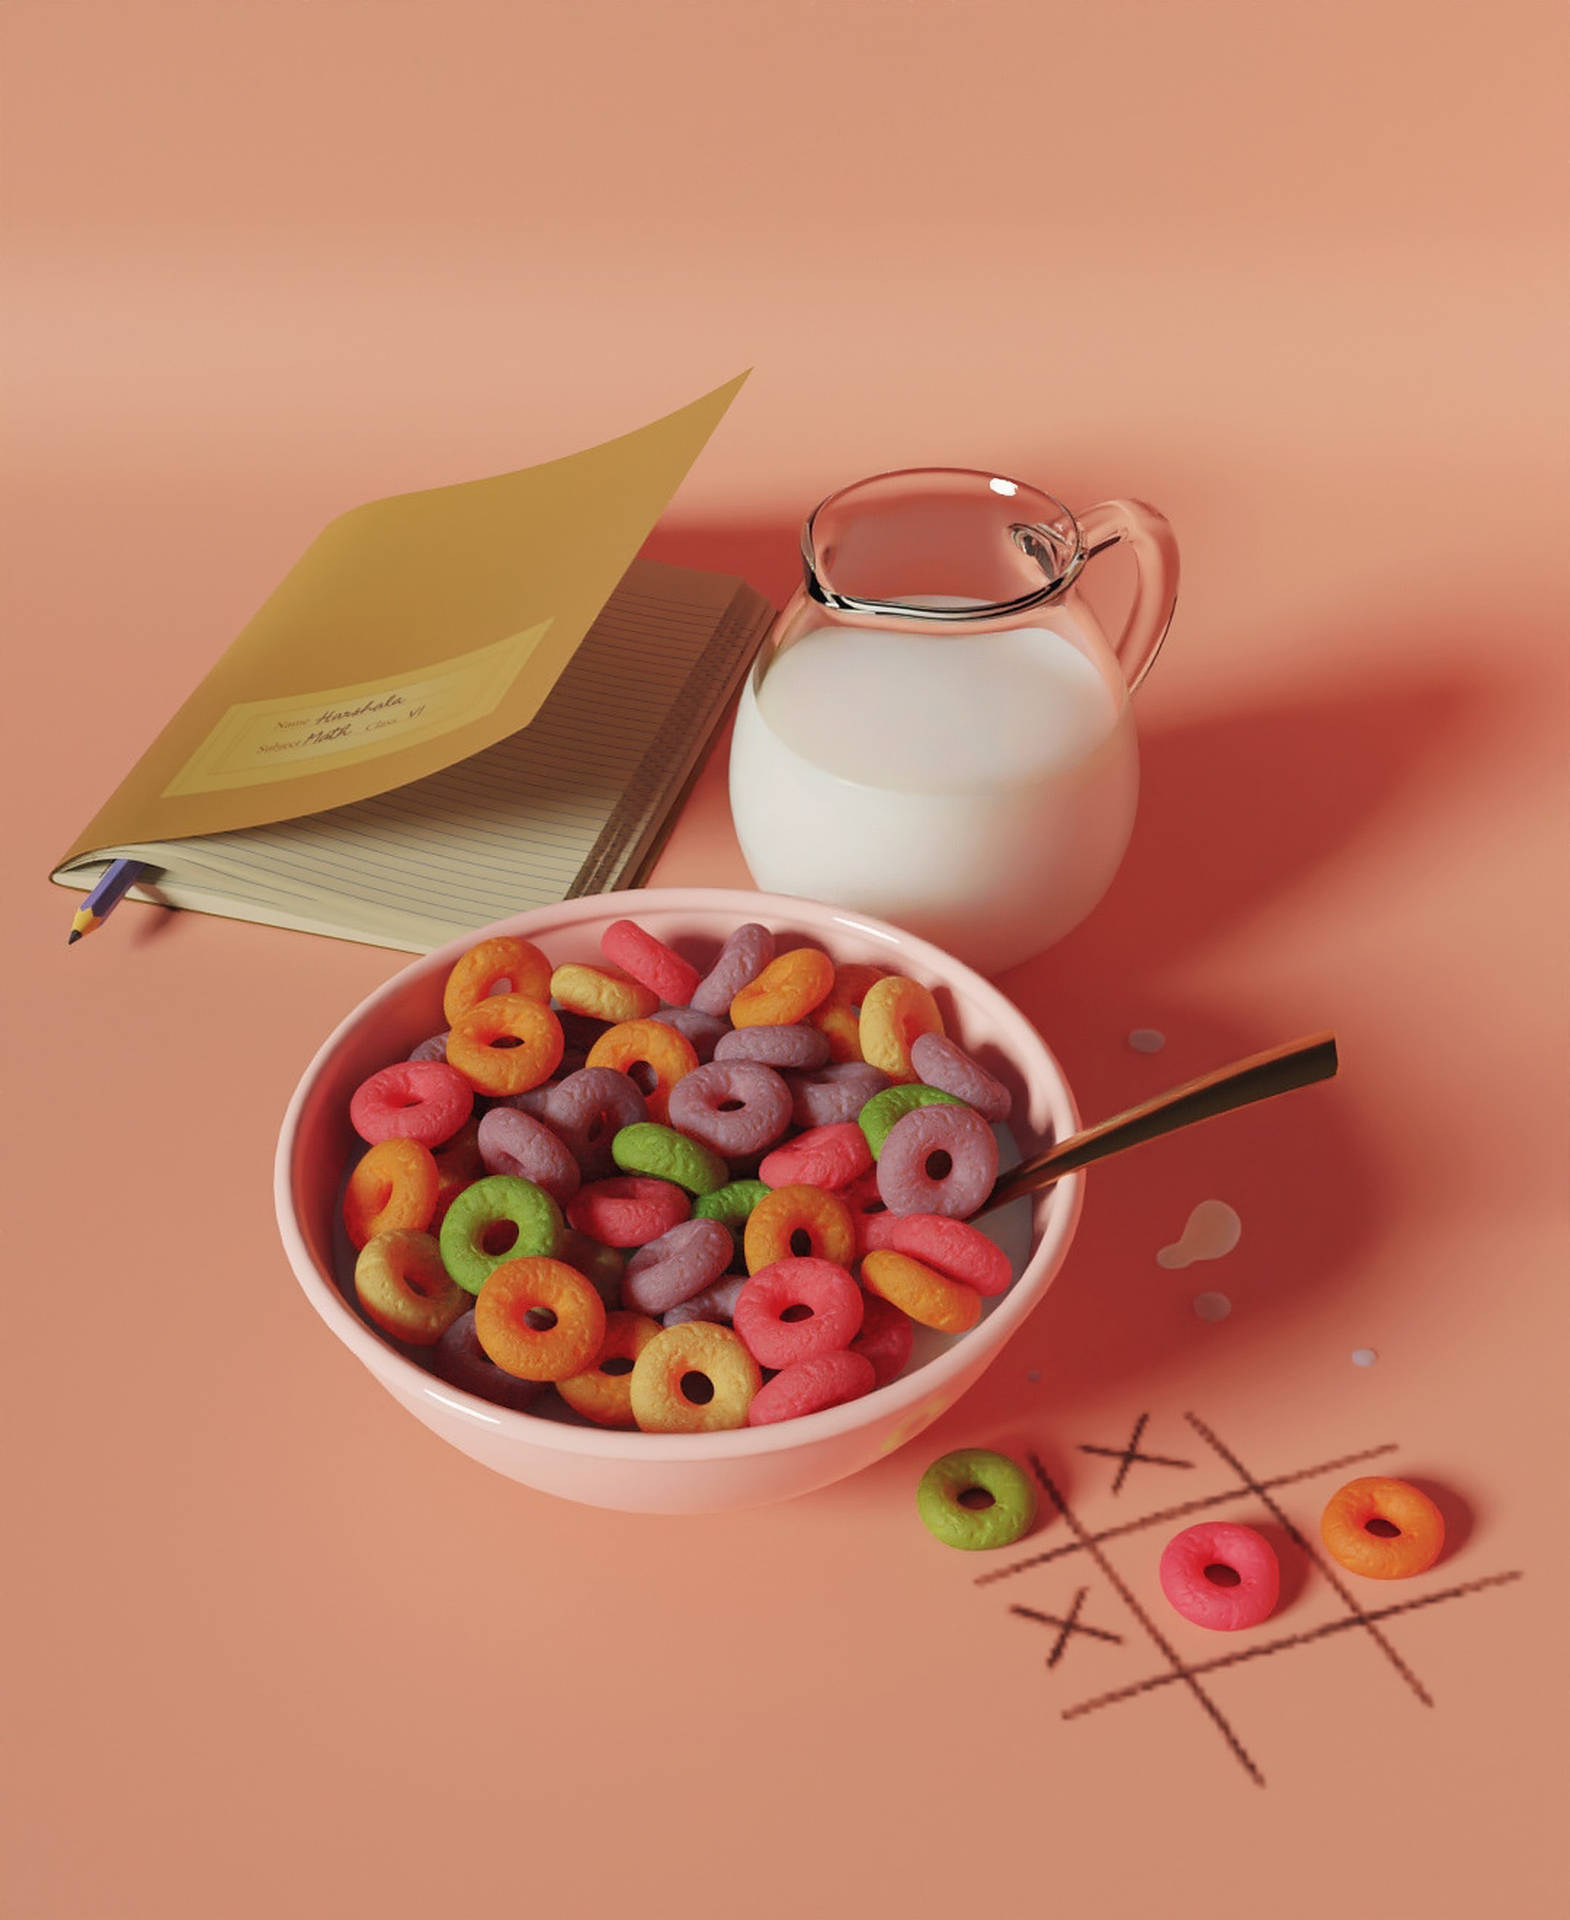 Cereal Wallpapers